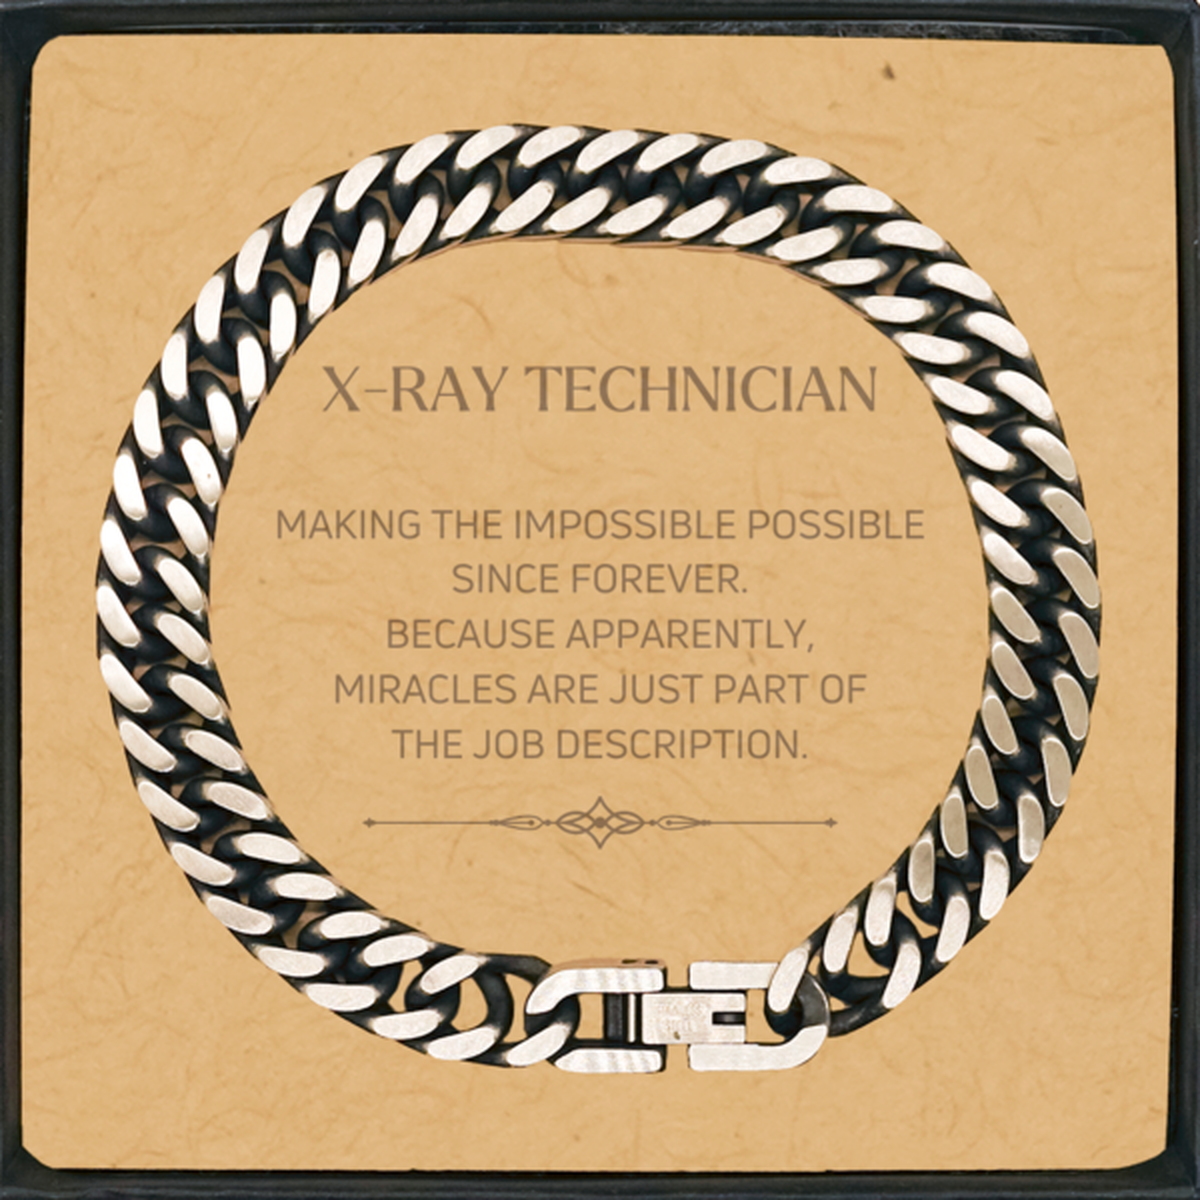 Funny X-Ray Technician Gifts, Miracles are just part of the job description, Inspirational Birthday Cuban Link Chain Bracelet For X-Ray Technician, Men, Women, Coworkers, Friends, Boss